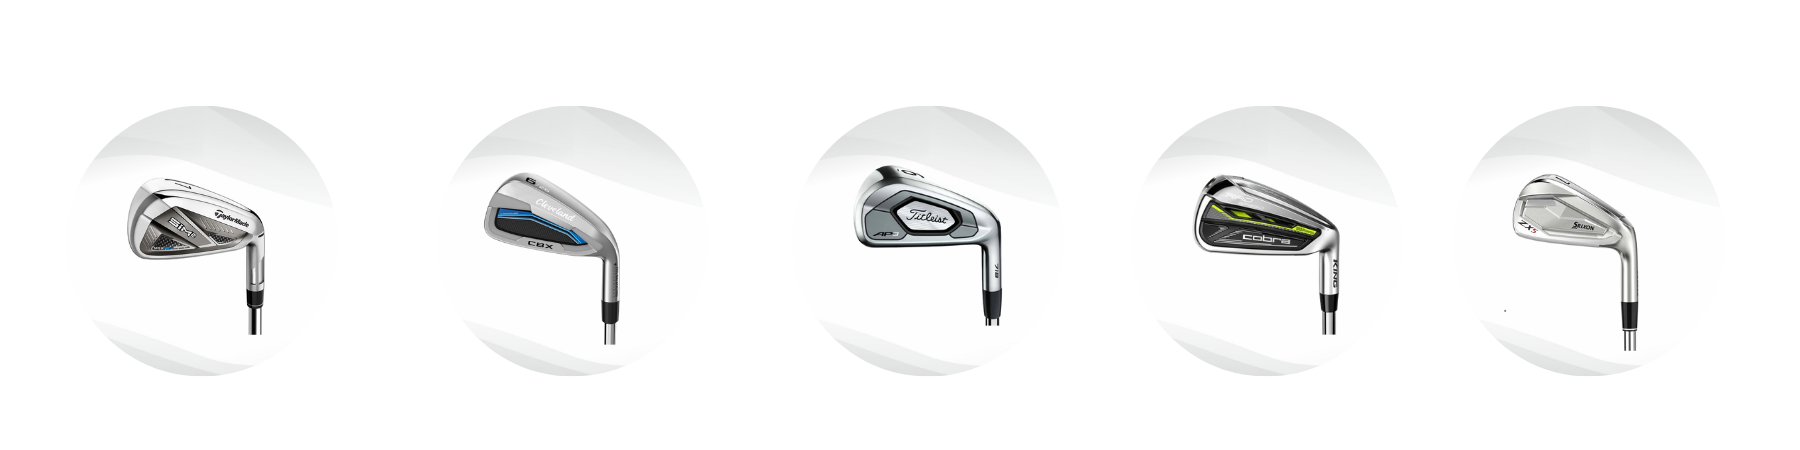 Golf Iron Sets | Asiansports.in